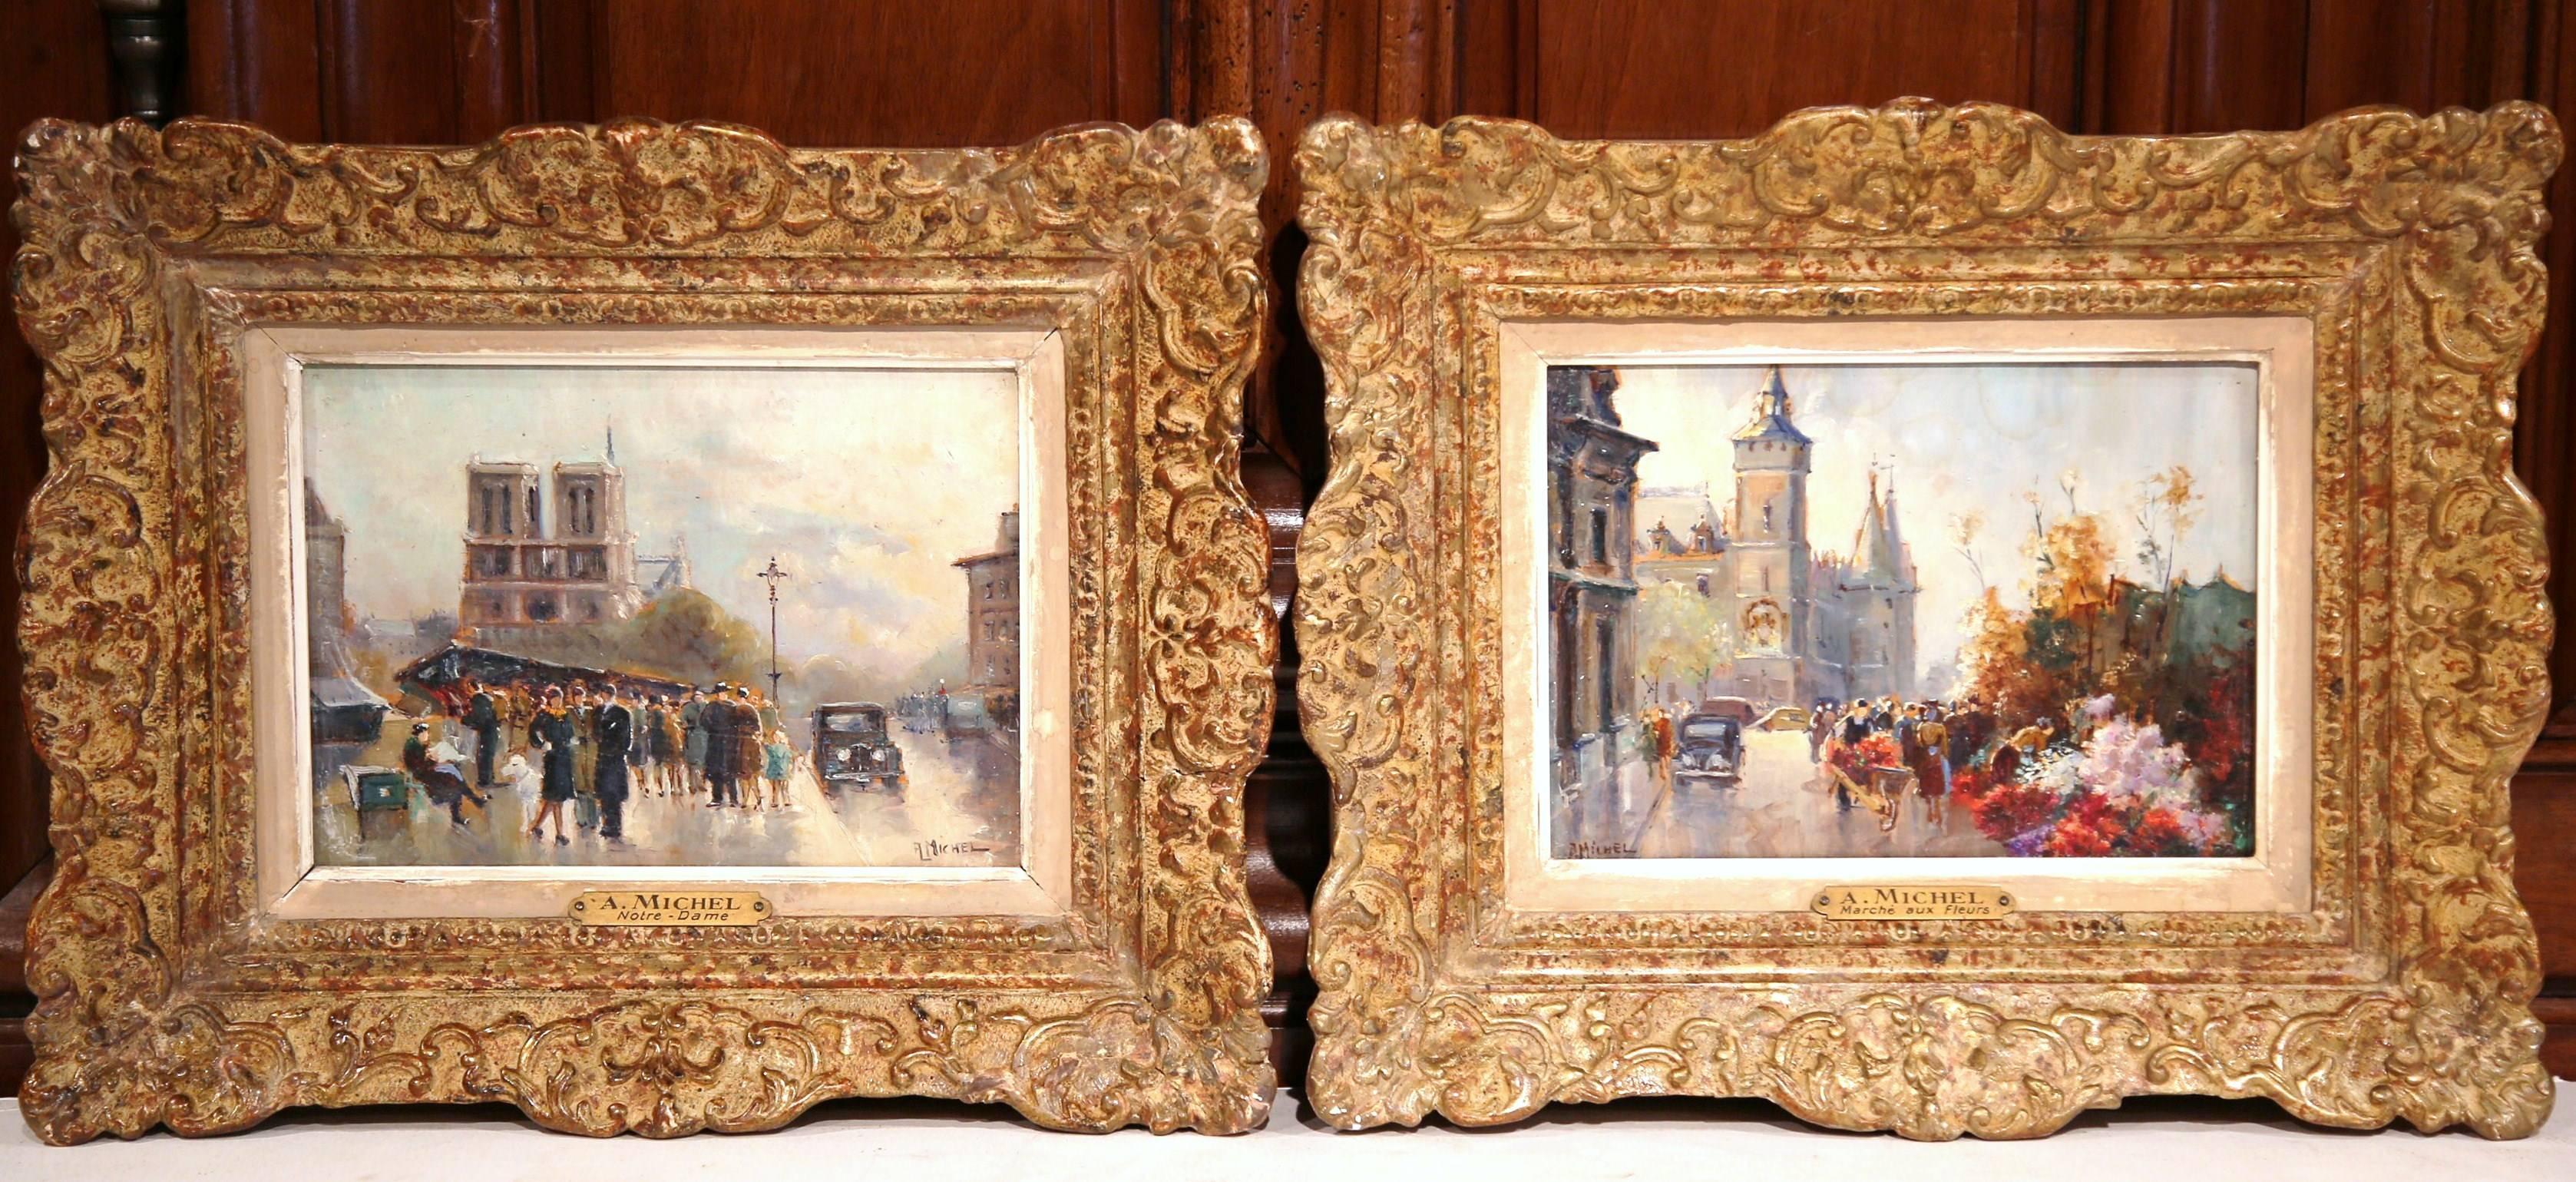 This beautiful antique oil on board paintings were created in France circa 1942. Each painting, is set inside an ornate, carved gilt frame, and depicts two iconic  Paris landmarks on the Ile de la Cite: " Notre-Dame" and " Le Marche aux Fleurs".